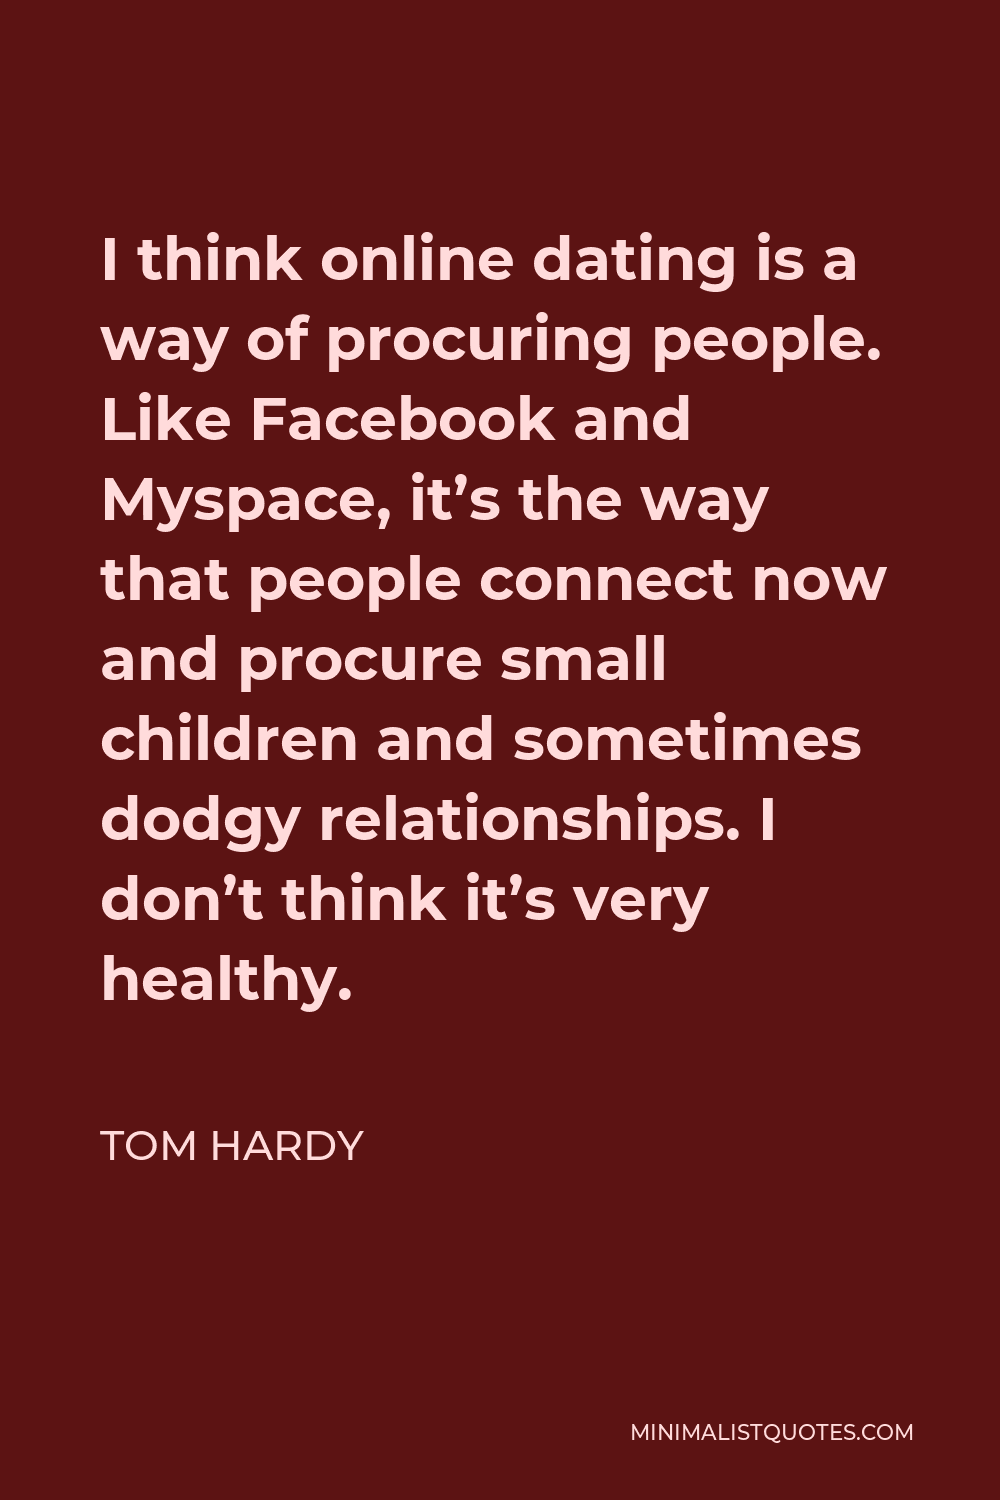 Tom Hardy Quote - I think online dating is a way of procuring people. Like Facebook and Myspace, it’s the way that people connect now and procure small children and sometimes dodgy relationships. I don’t think it’s very healthy.